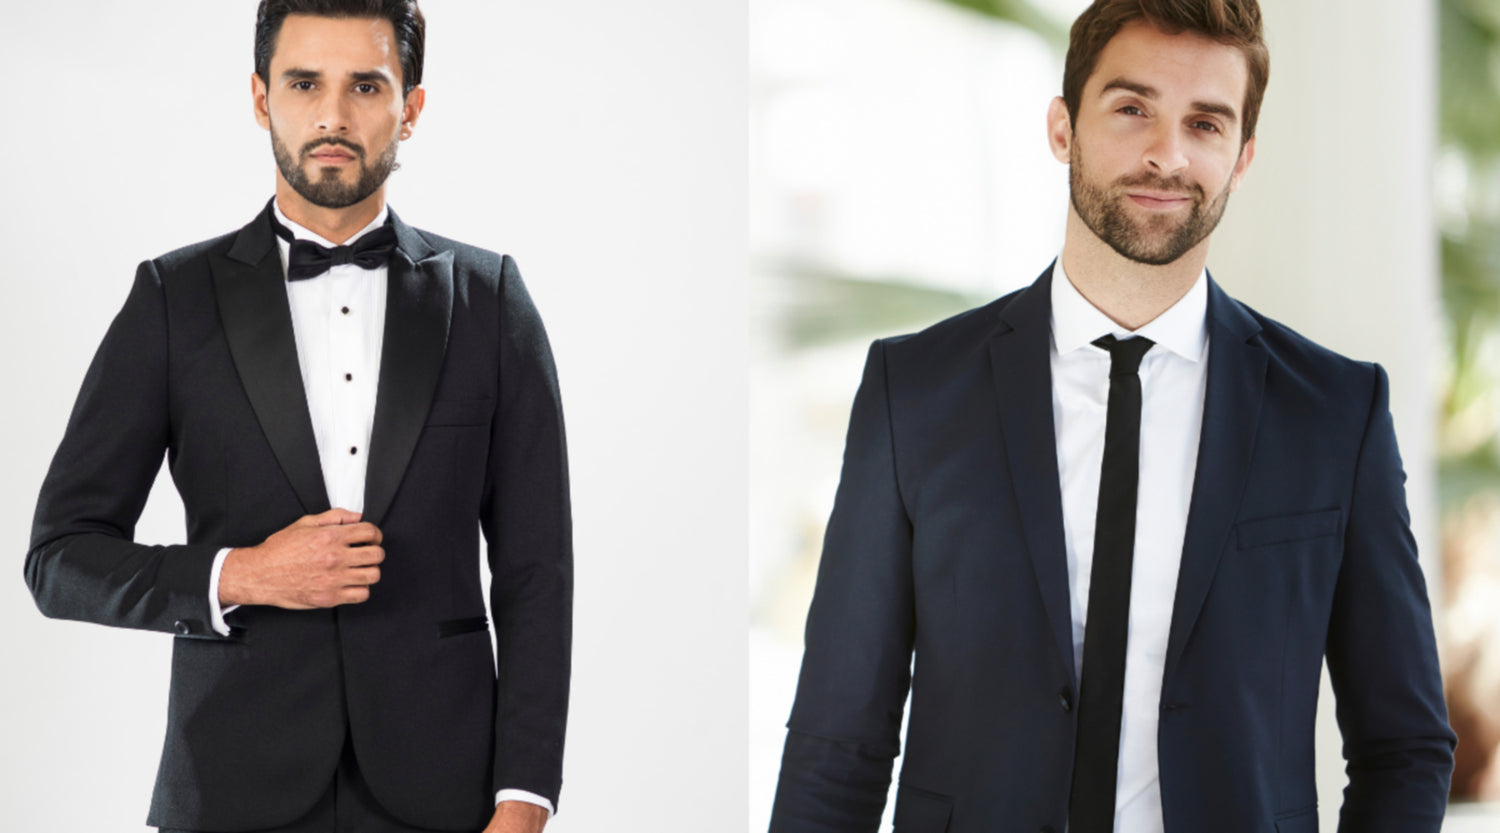 How to choose a groom's suit